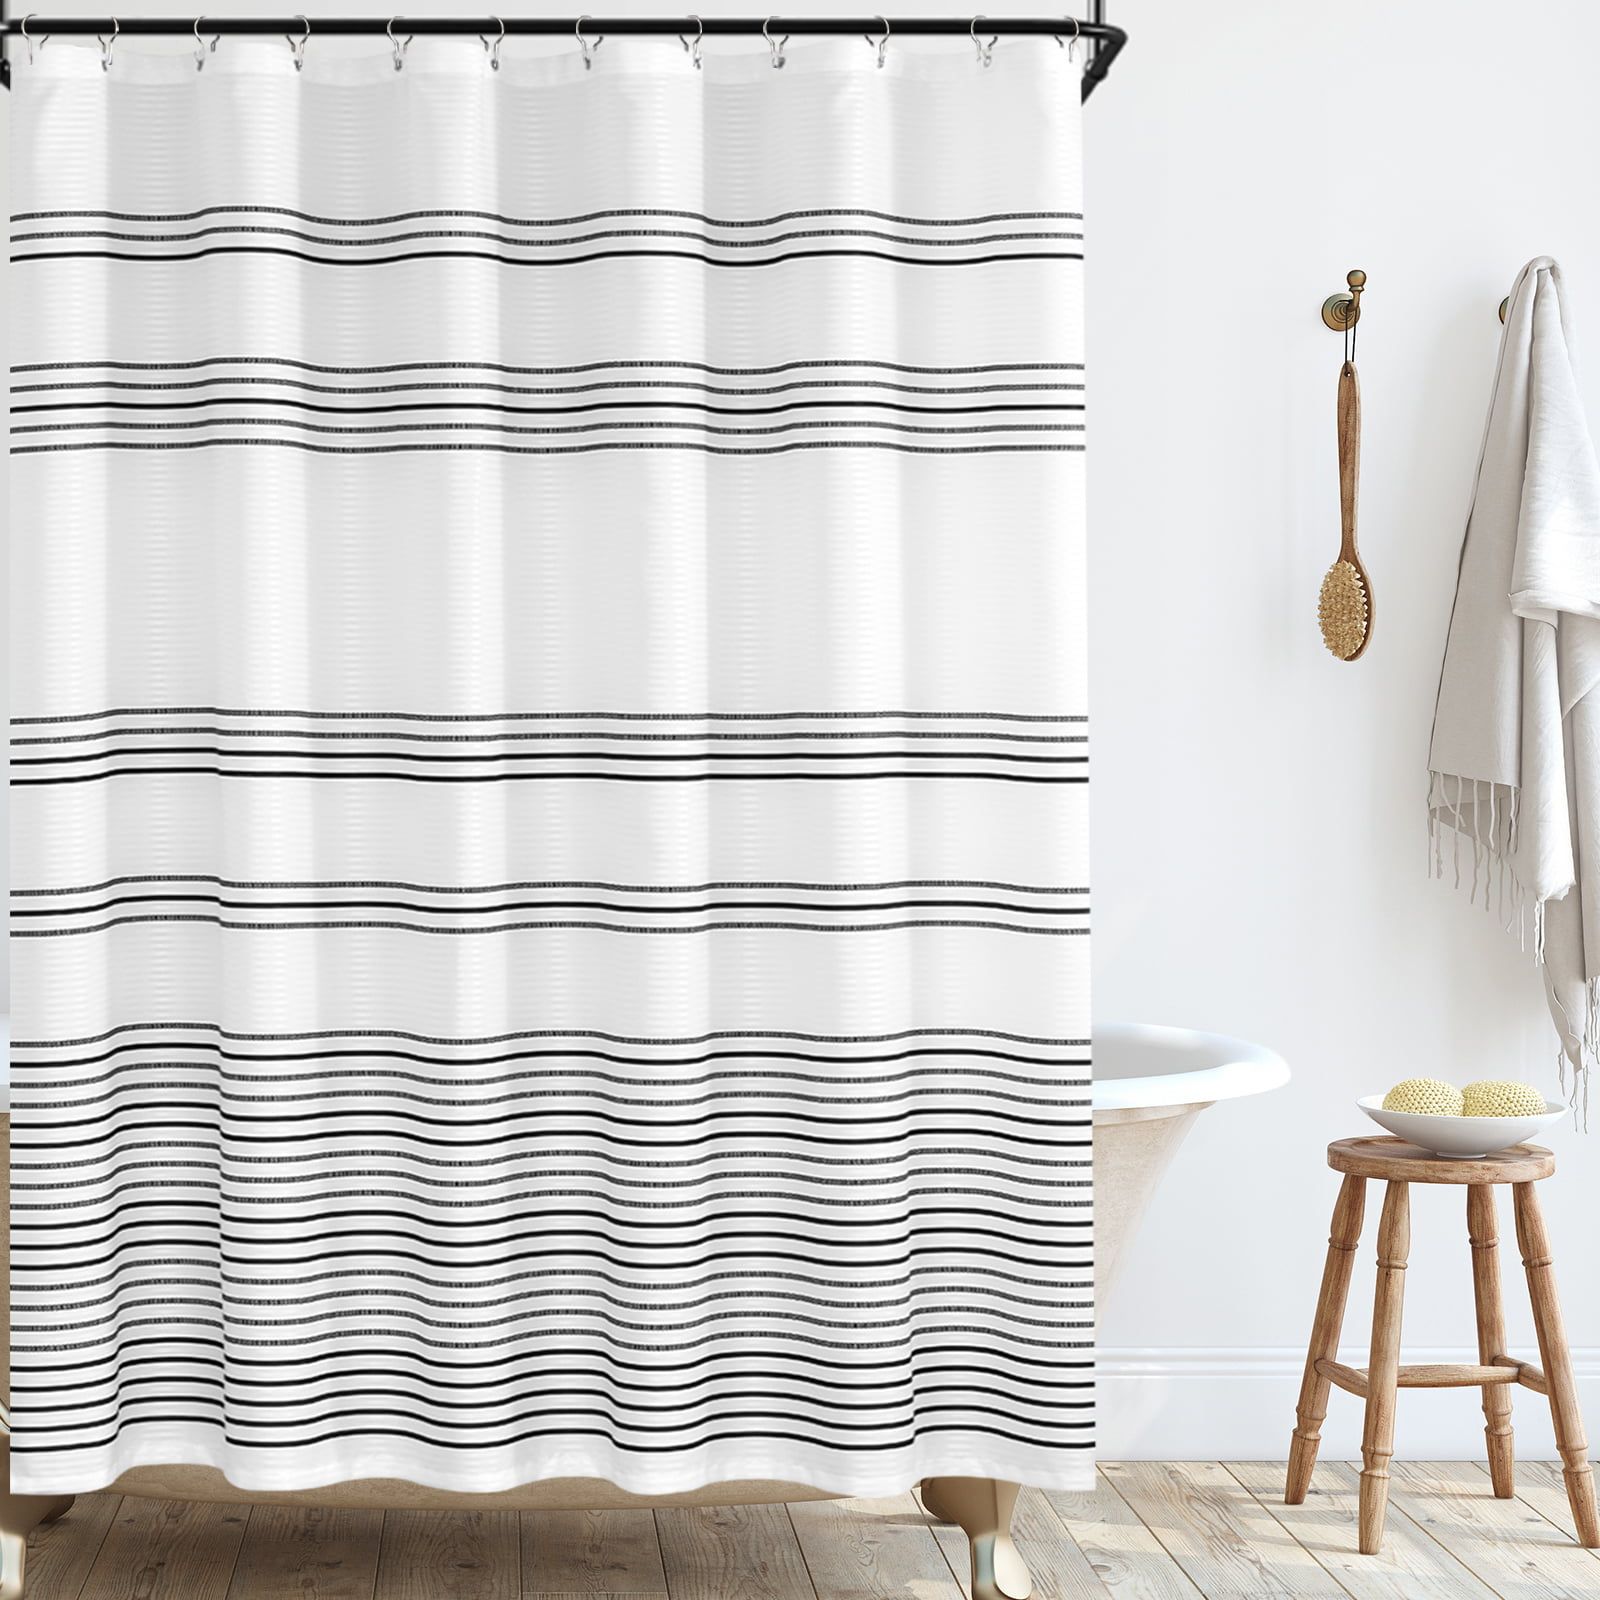 Classic Elegance: Transform Your Bathroom with a Black and White Striped Shower Curtain